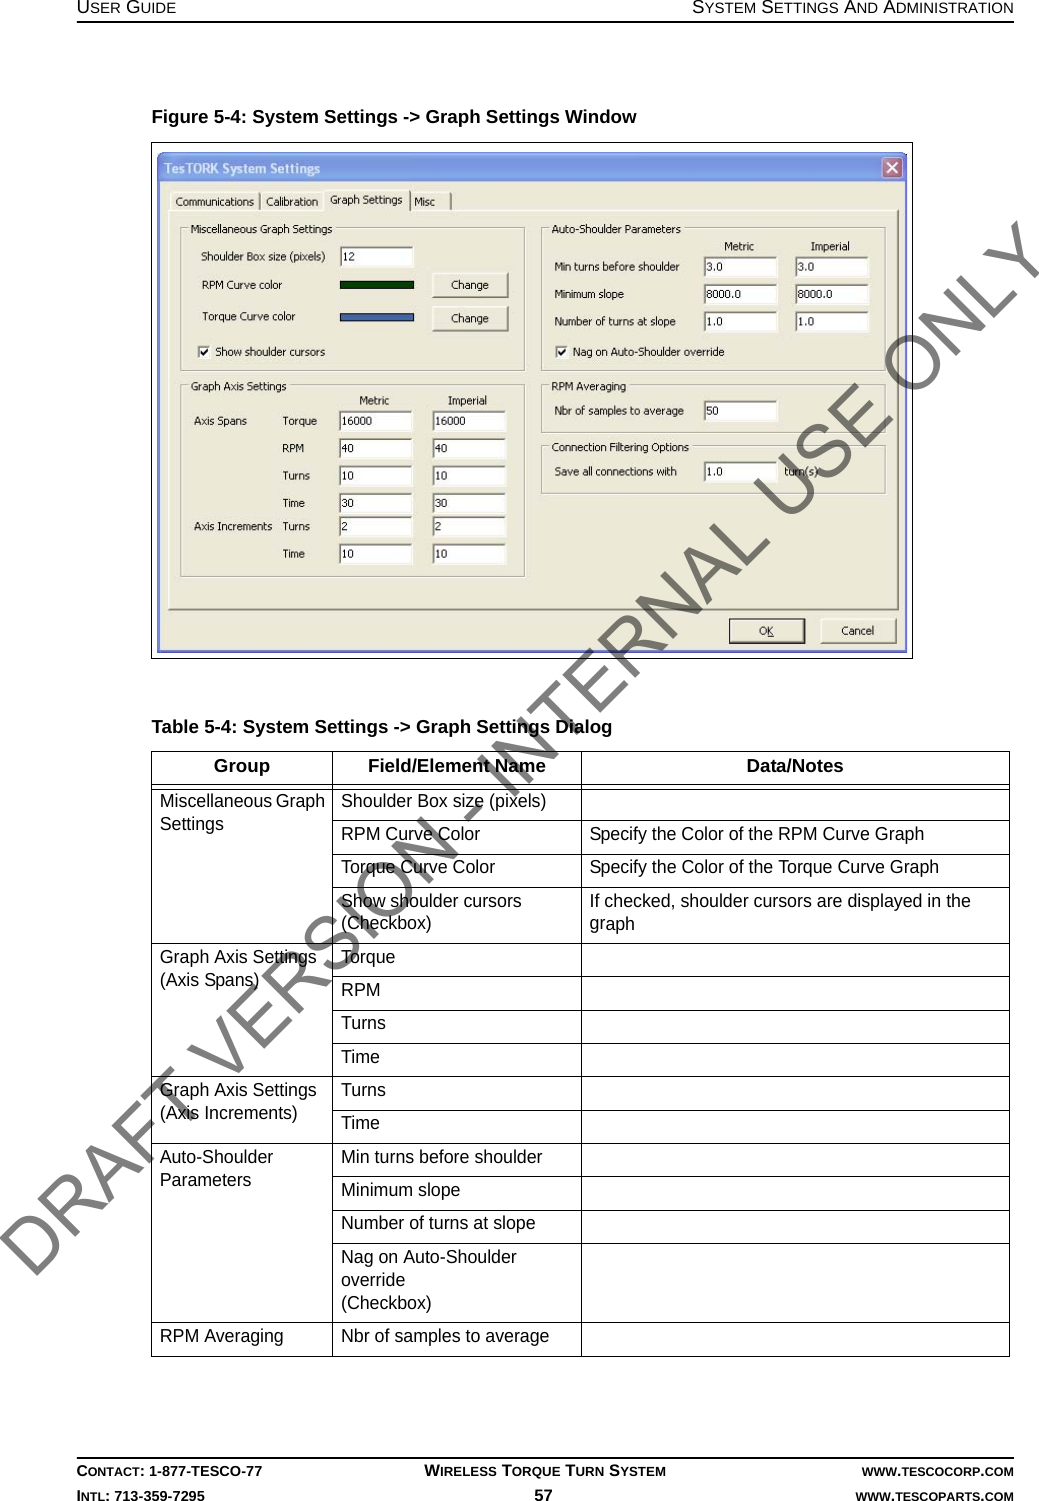 USER GUIDE SYSTEM SETTINGS AND ADMINISTRATIONCONTACT: 1-877-TESCO-77 WIRELESS TORQUE TURN SYSTEM WWW.TESCOCORP.COMINTL: 713-359-7295 57    WWW.TESCOPARTS.COMFigure 5-4: System Settings -&gt; Graph Settings WindowTable 5-4: System Settings -&gt; Graph Settings Dialog Group Field/Element Name Data/NotesMiscellaneous Graph SettingsShoulder Box size (pixels)RPM Curve Color Specify the Color of the RPM Curve GraphTorque Curve Color Specify the Color of the Torque Curve GraphShow shoulder cursors(Checkbox)If checked, shoulder cursors are displayed in the graphGraph Axis Settings(Axis Spans)TorqueRPMTurnsTimeGraph Axis Settings(Axis Increments)TurnsTimeAuto-Shoulder ParametersMin turns before shoulderMinimum slopeNumber of turns at slopeNag on Auto-Shoulder override(Checkbox)RPM Averaging Nbr of samples to averageDRAFT VERSION - INTERNAL USE ONLY